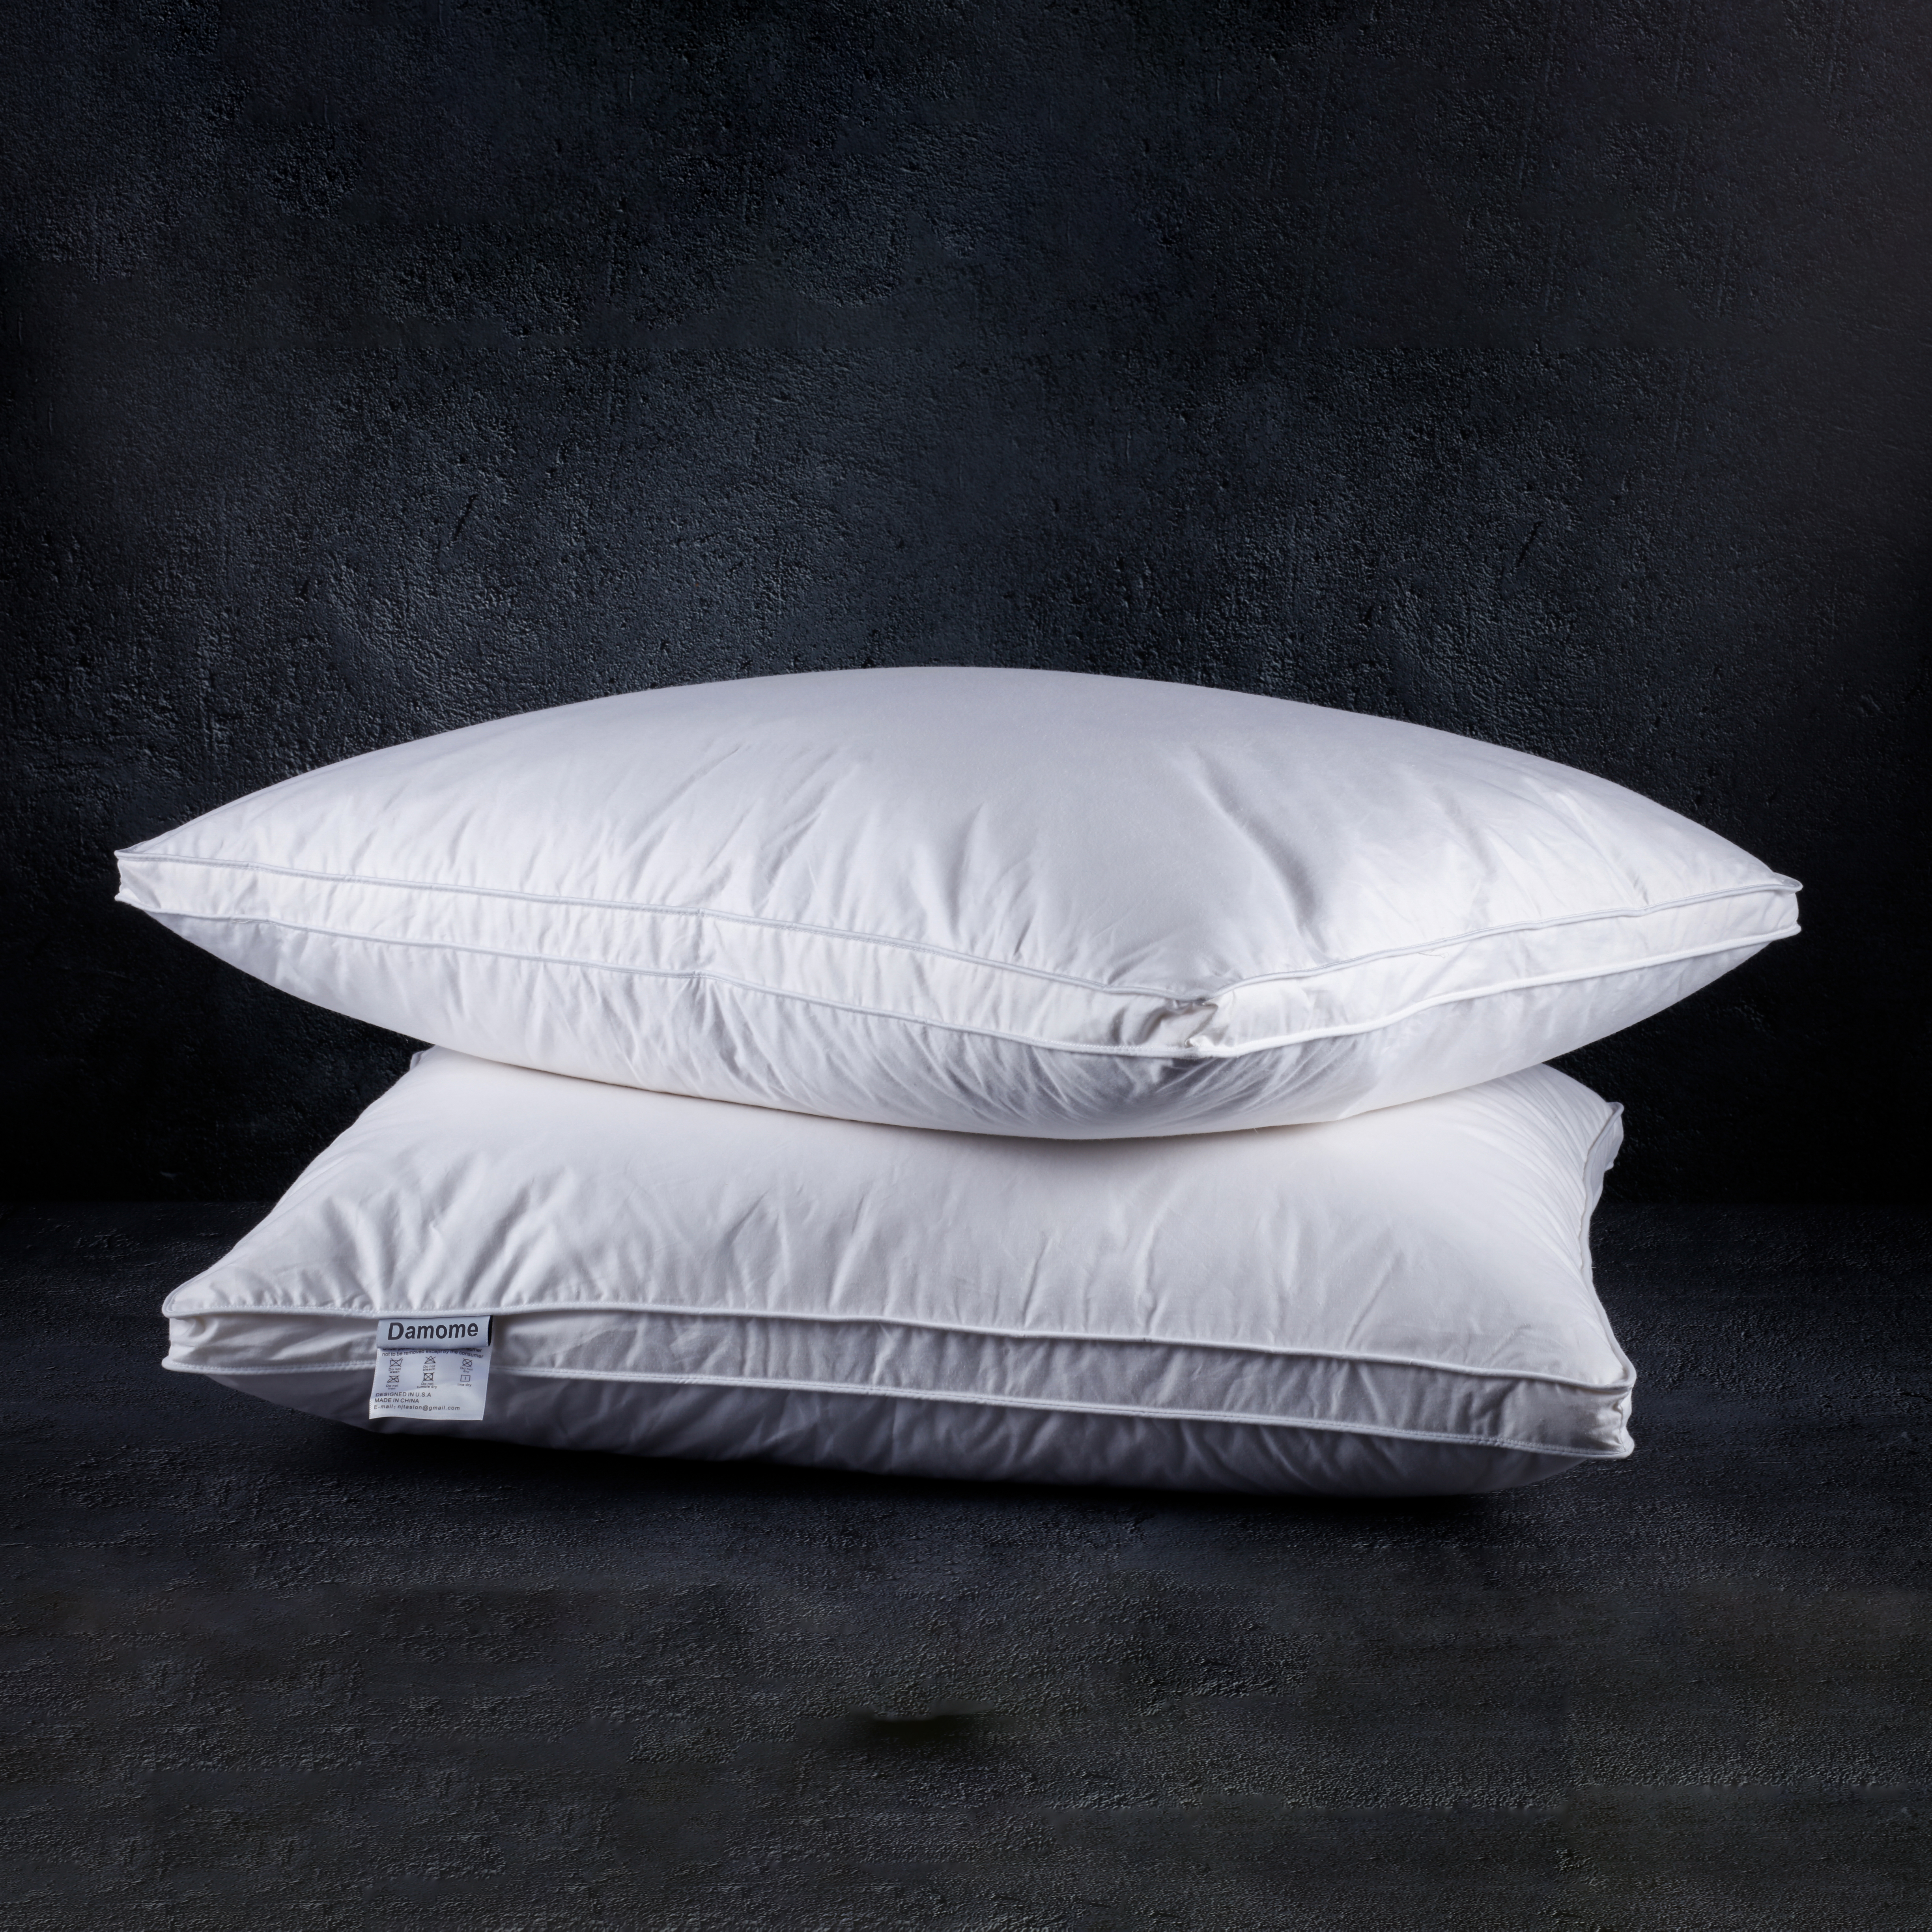 Damome Size: Queen Down Pillows for Sleeping(2 Pack), queen(20inx30in)-White Goose Down Feather Bed Pillow Inserts, 100% Brushed Cotton Cover 40s/2, 233 Thread Count, Lightweight, for All Sleep